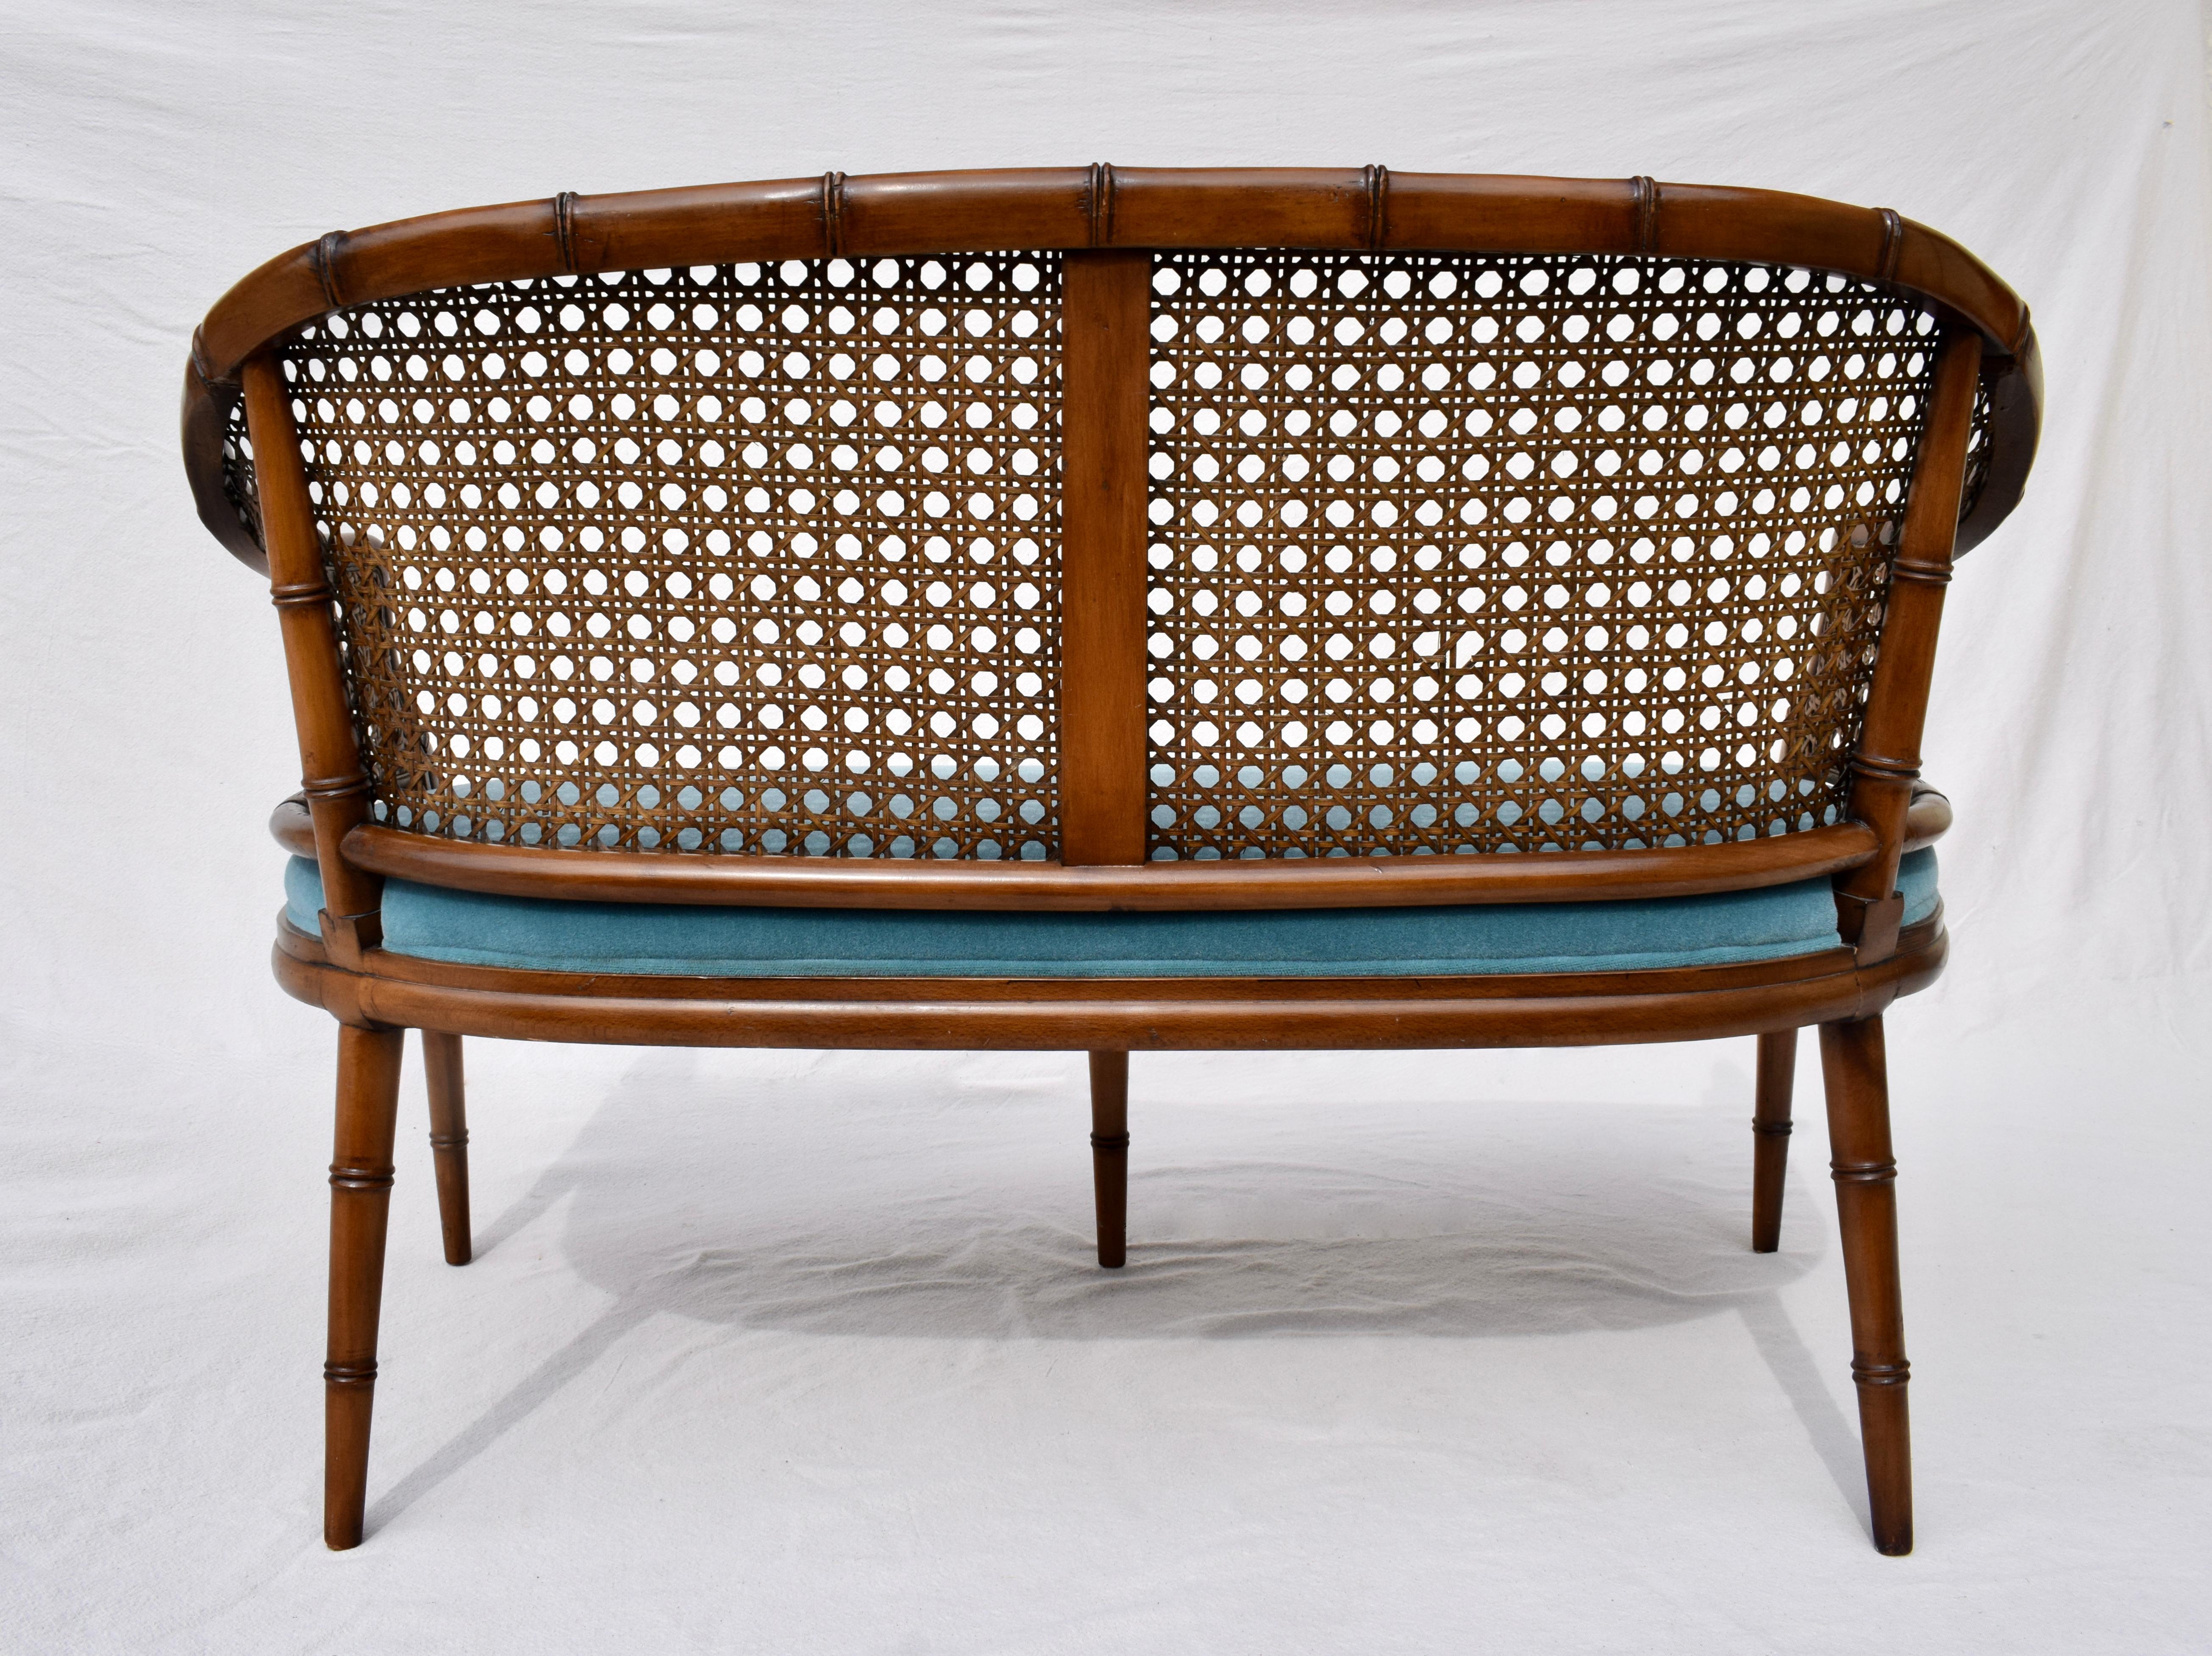 20th Century Chinese Chippendale Caned Barrel Back Settee Loveseat